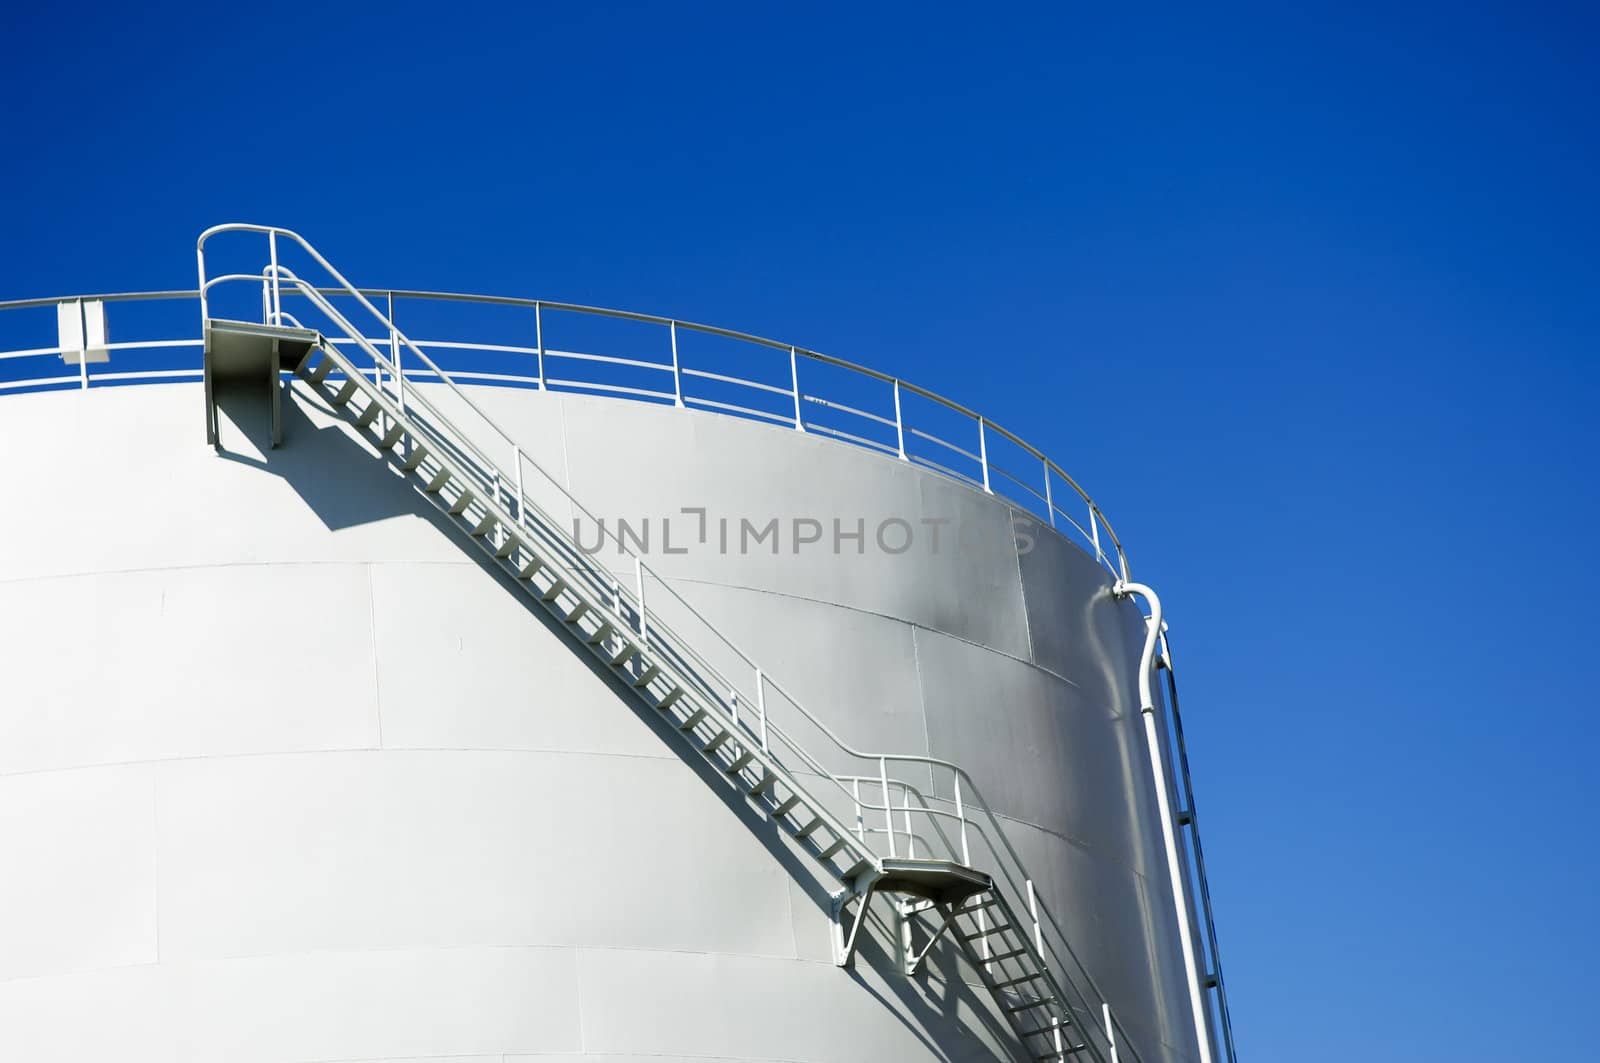 Oil reservoir detail with access ladder against a blue sky